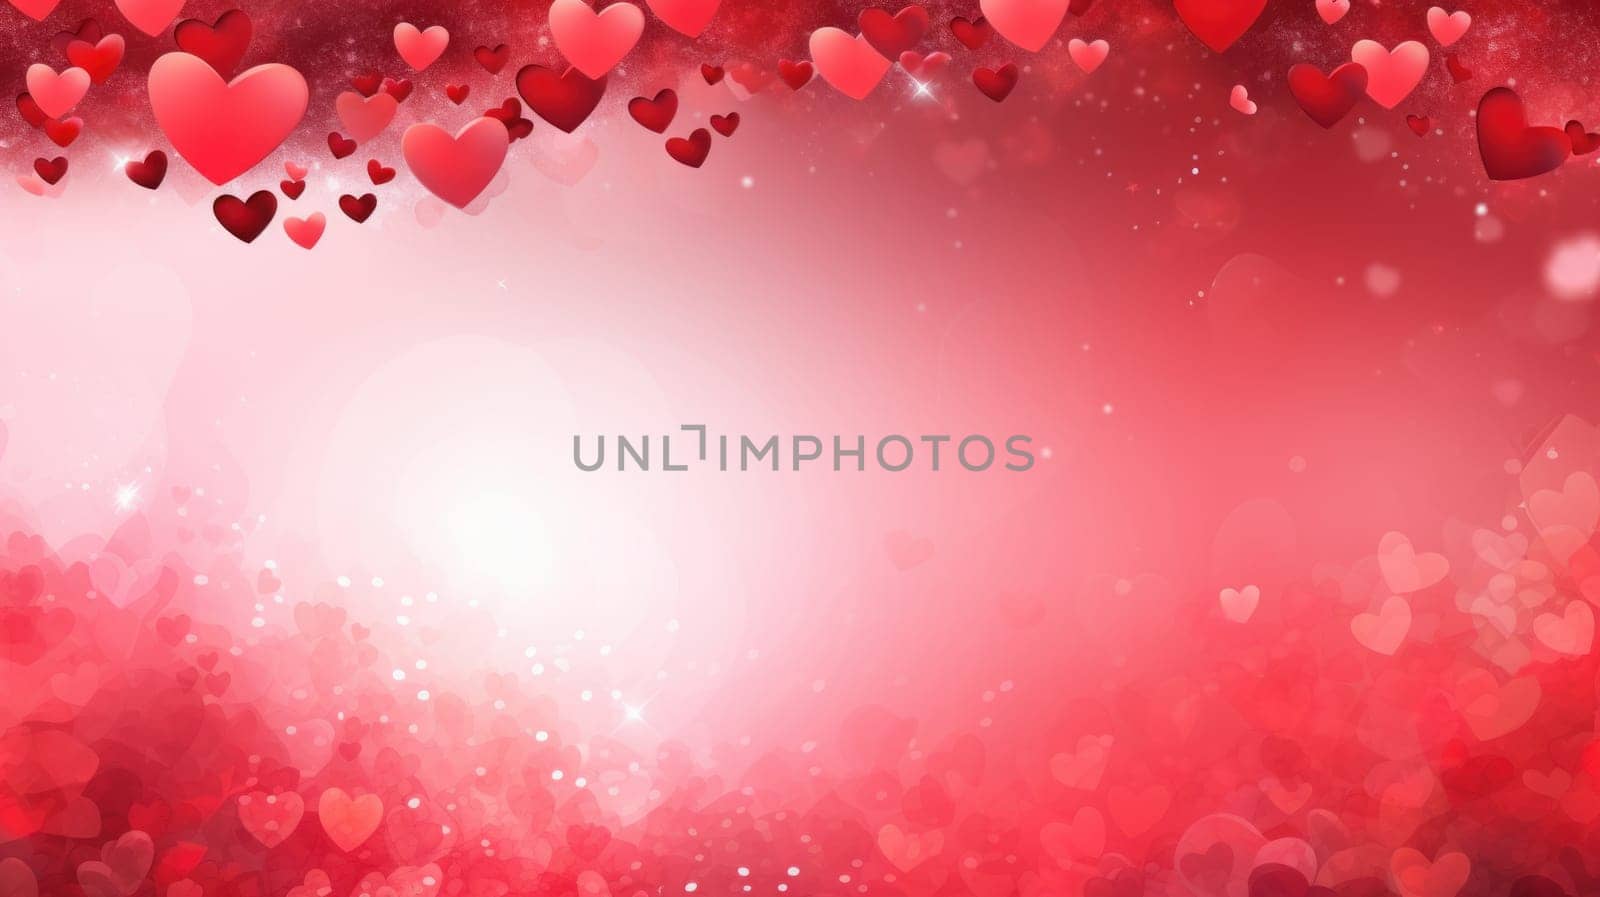 Background for Valentine's Day, AI by but_photo